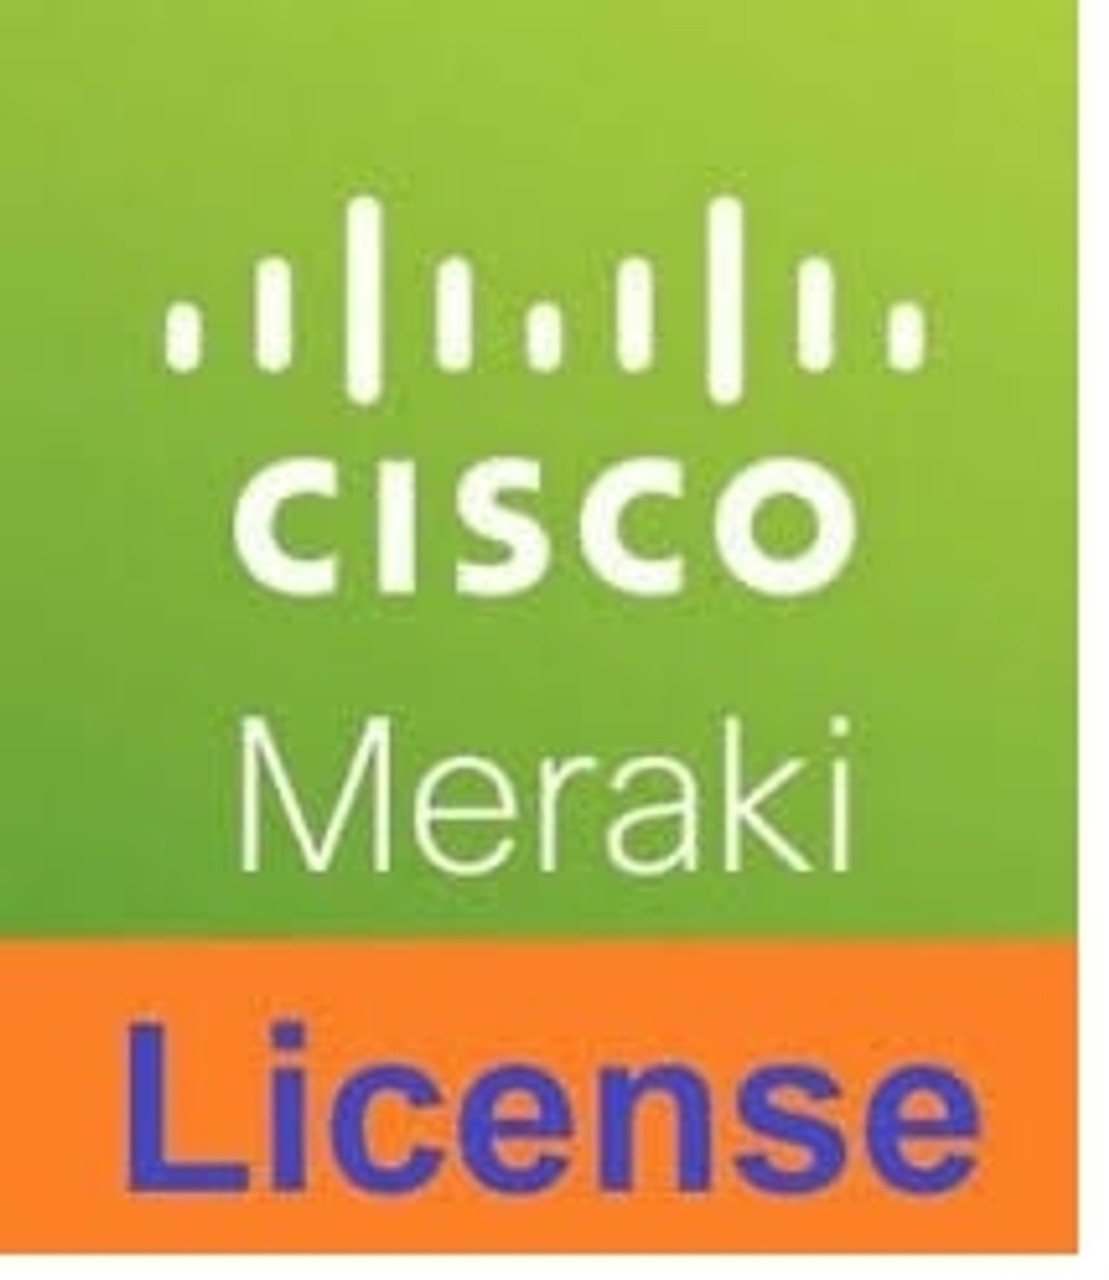 Meraki MX68CW Advanced Security License and Support, 7 Year